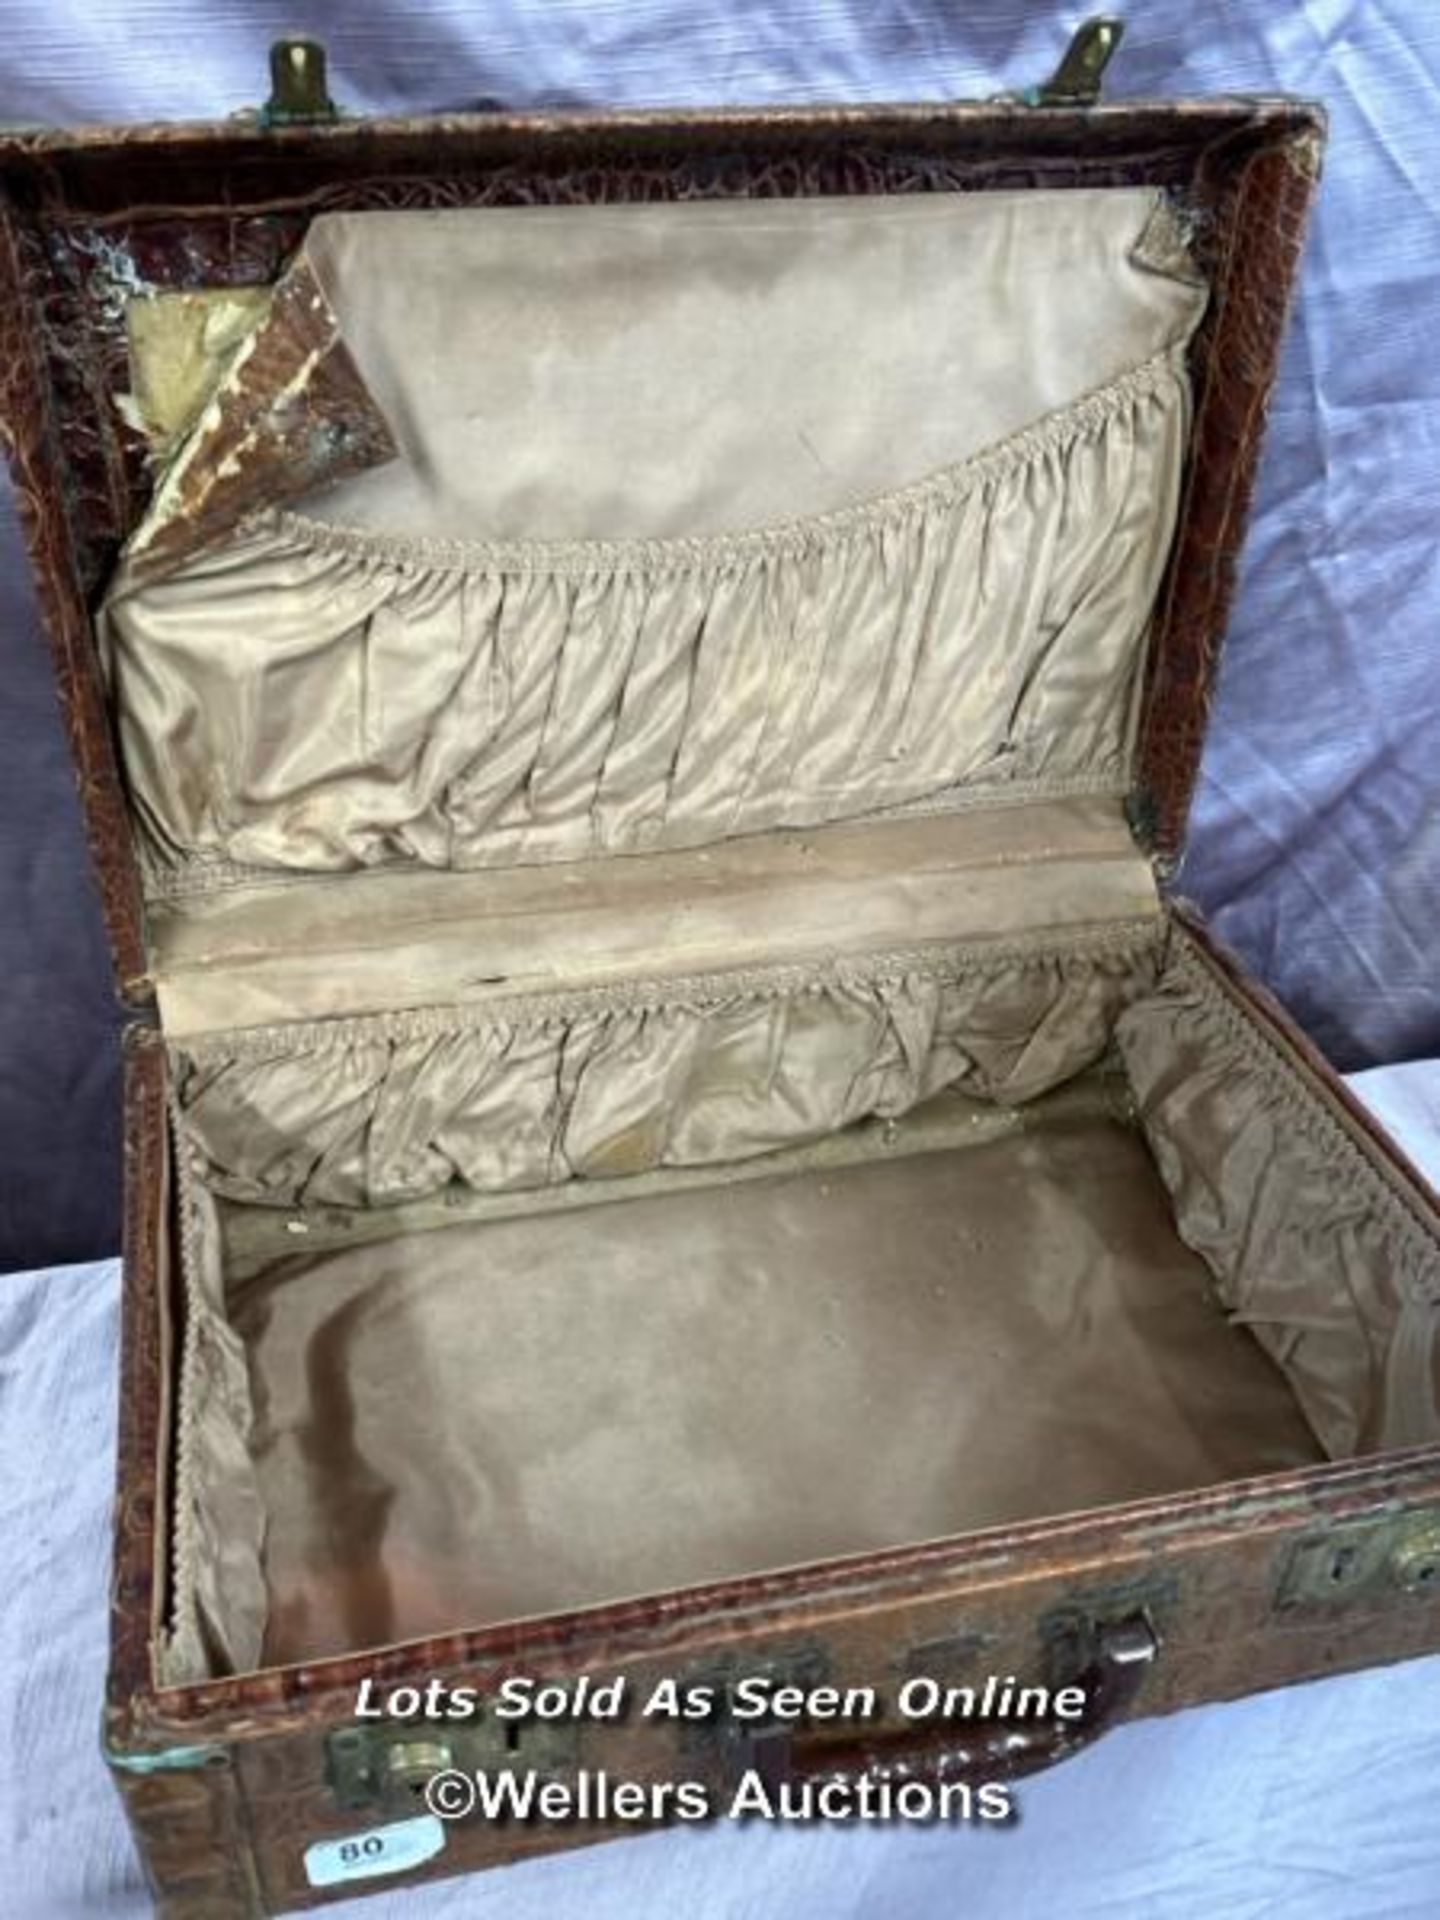 VINTAGE CROCODILE SKIN SUITCASE, MADE IN CANADA, 46 X 16 X 33CM - Image 3 of 4